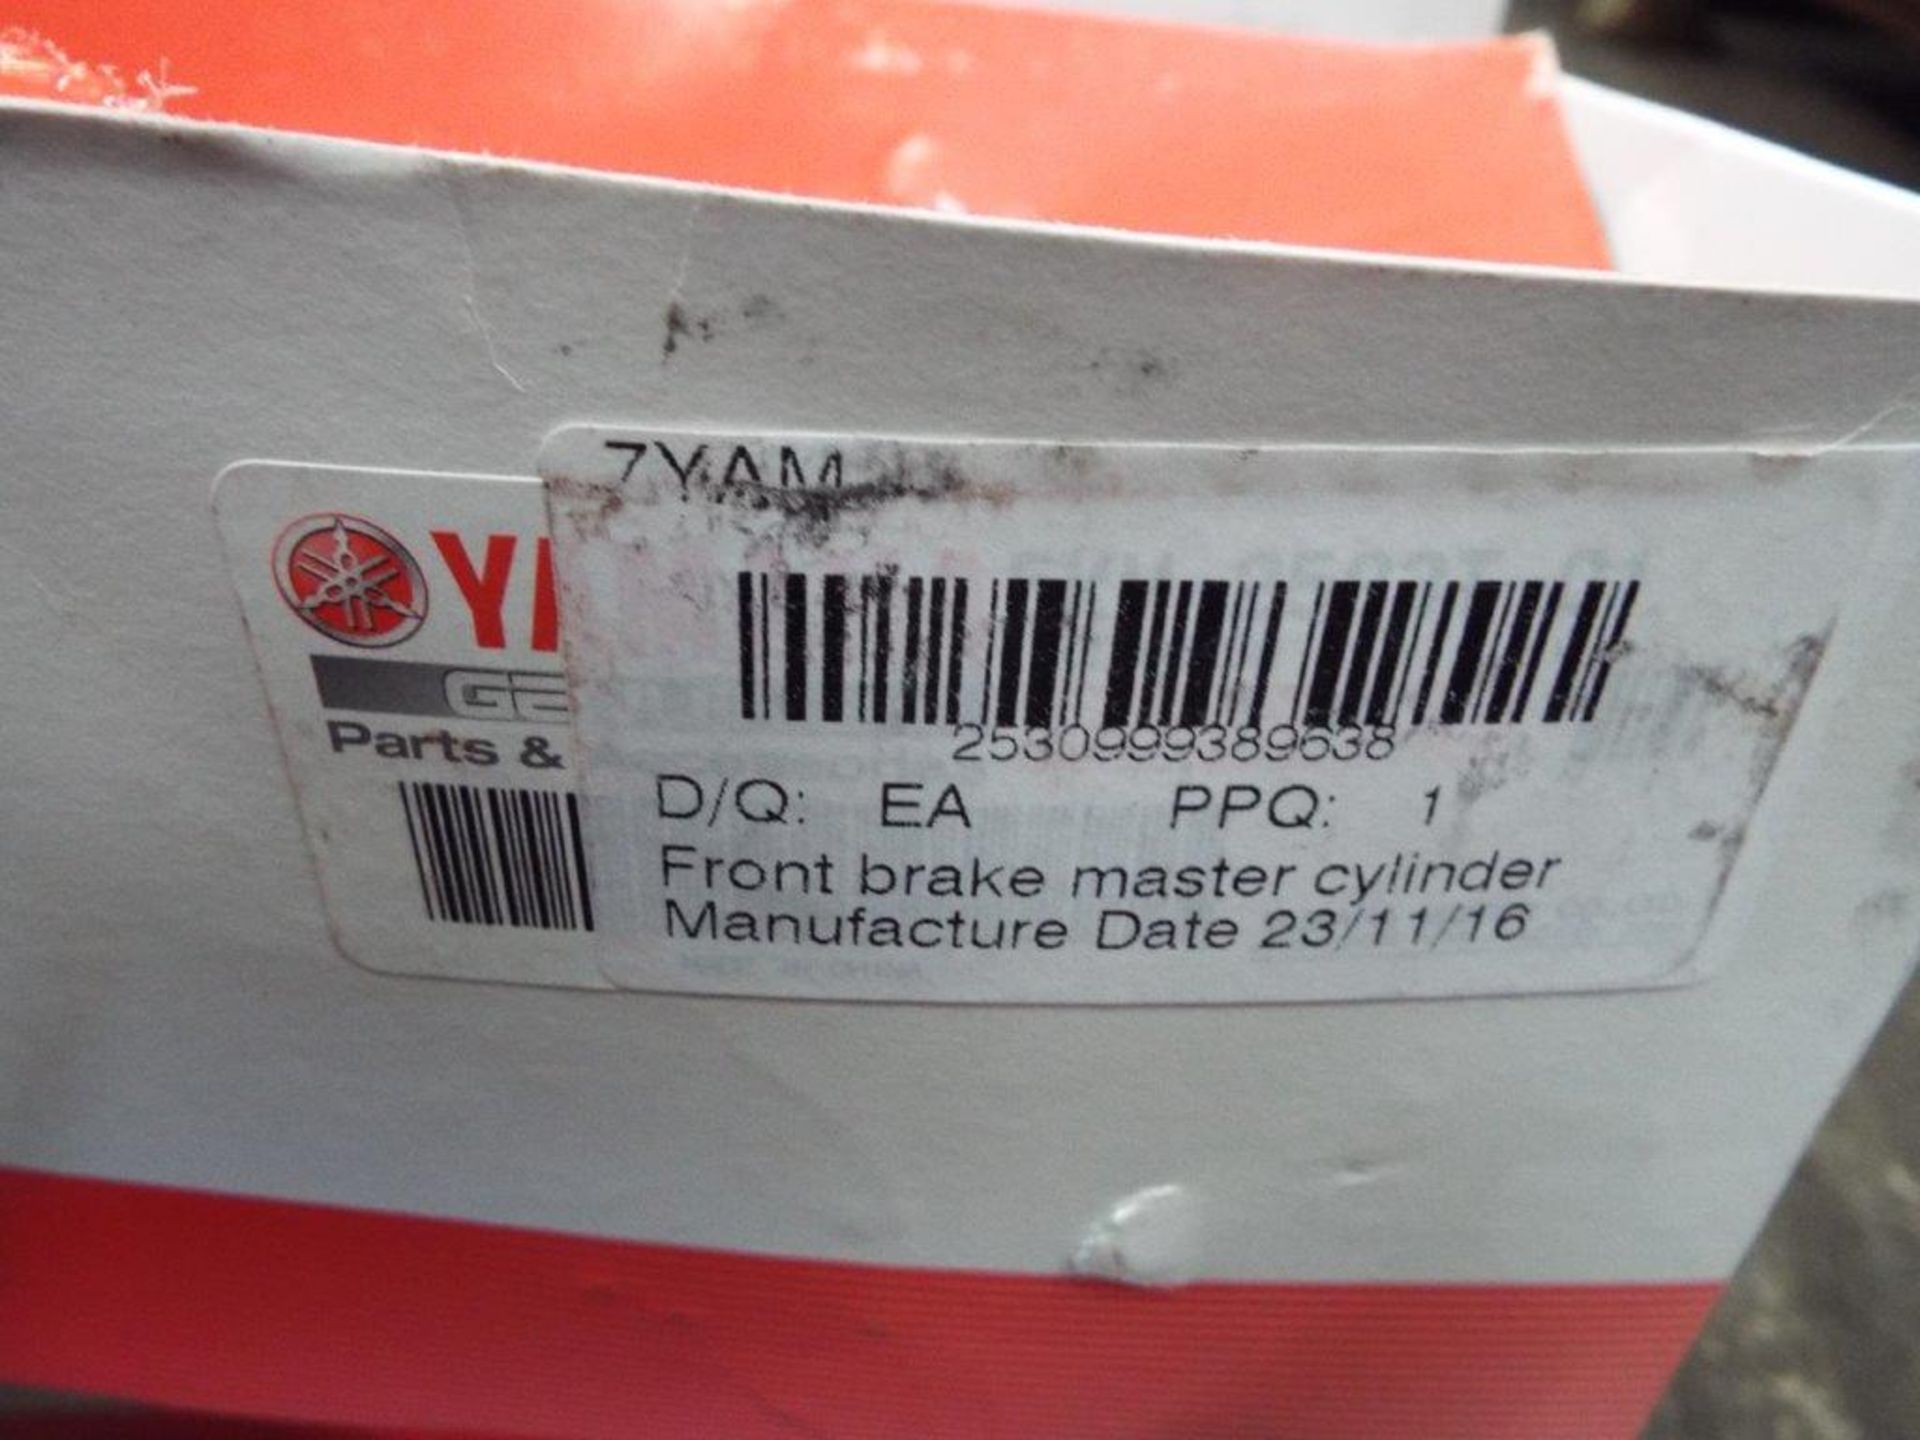 6 x Yamaha Grizzly Front Brake Master Cylinders - Image 5 of 6